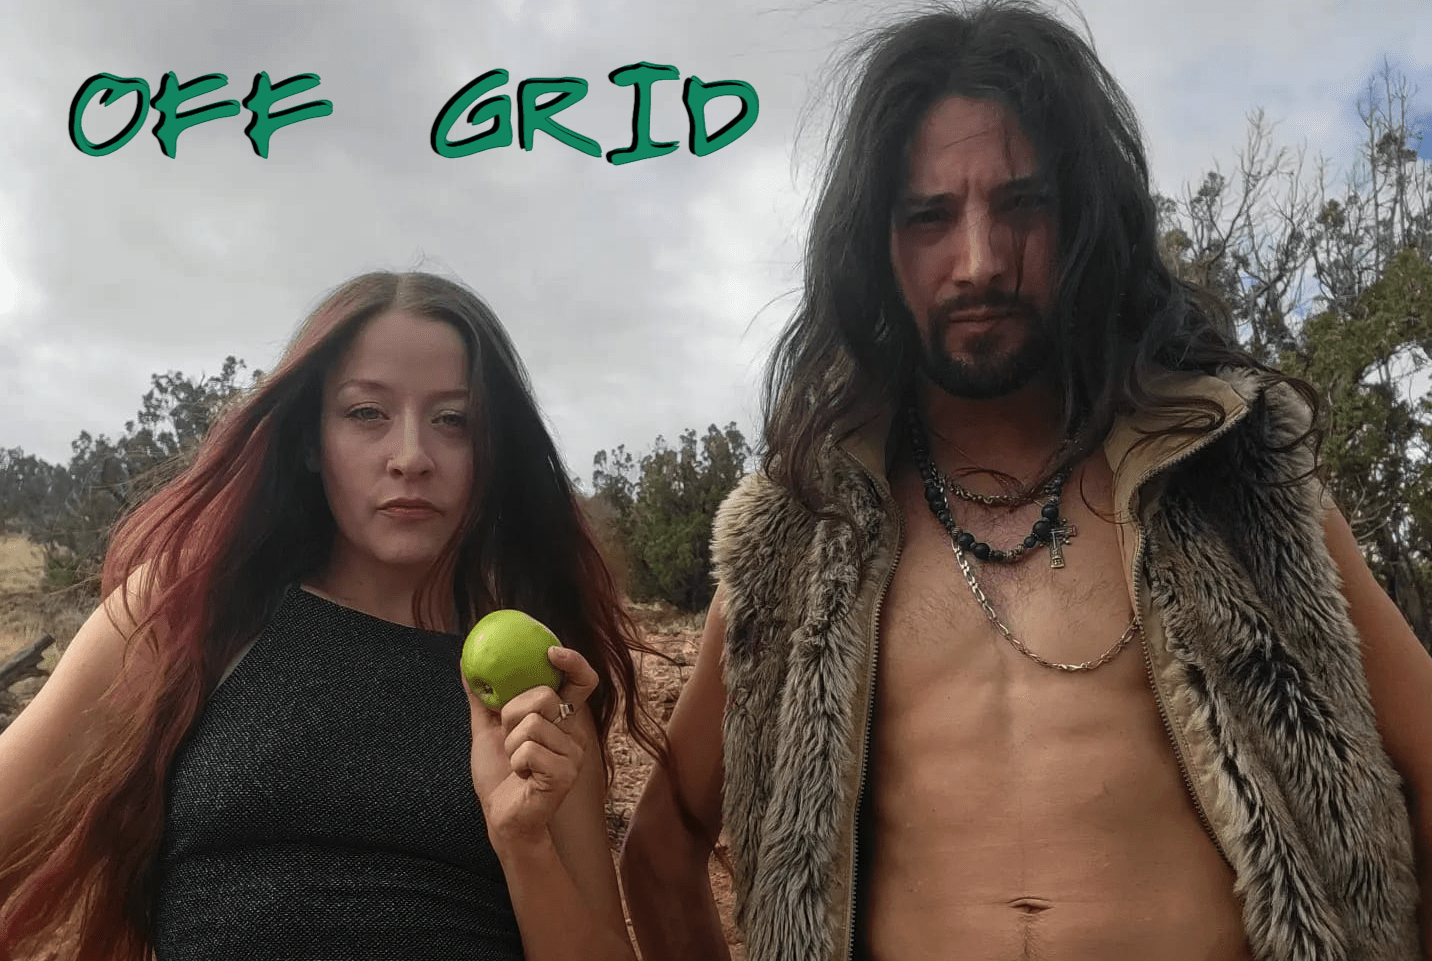 See what The Band Famous recommends for off grid living!